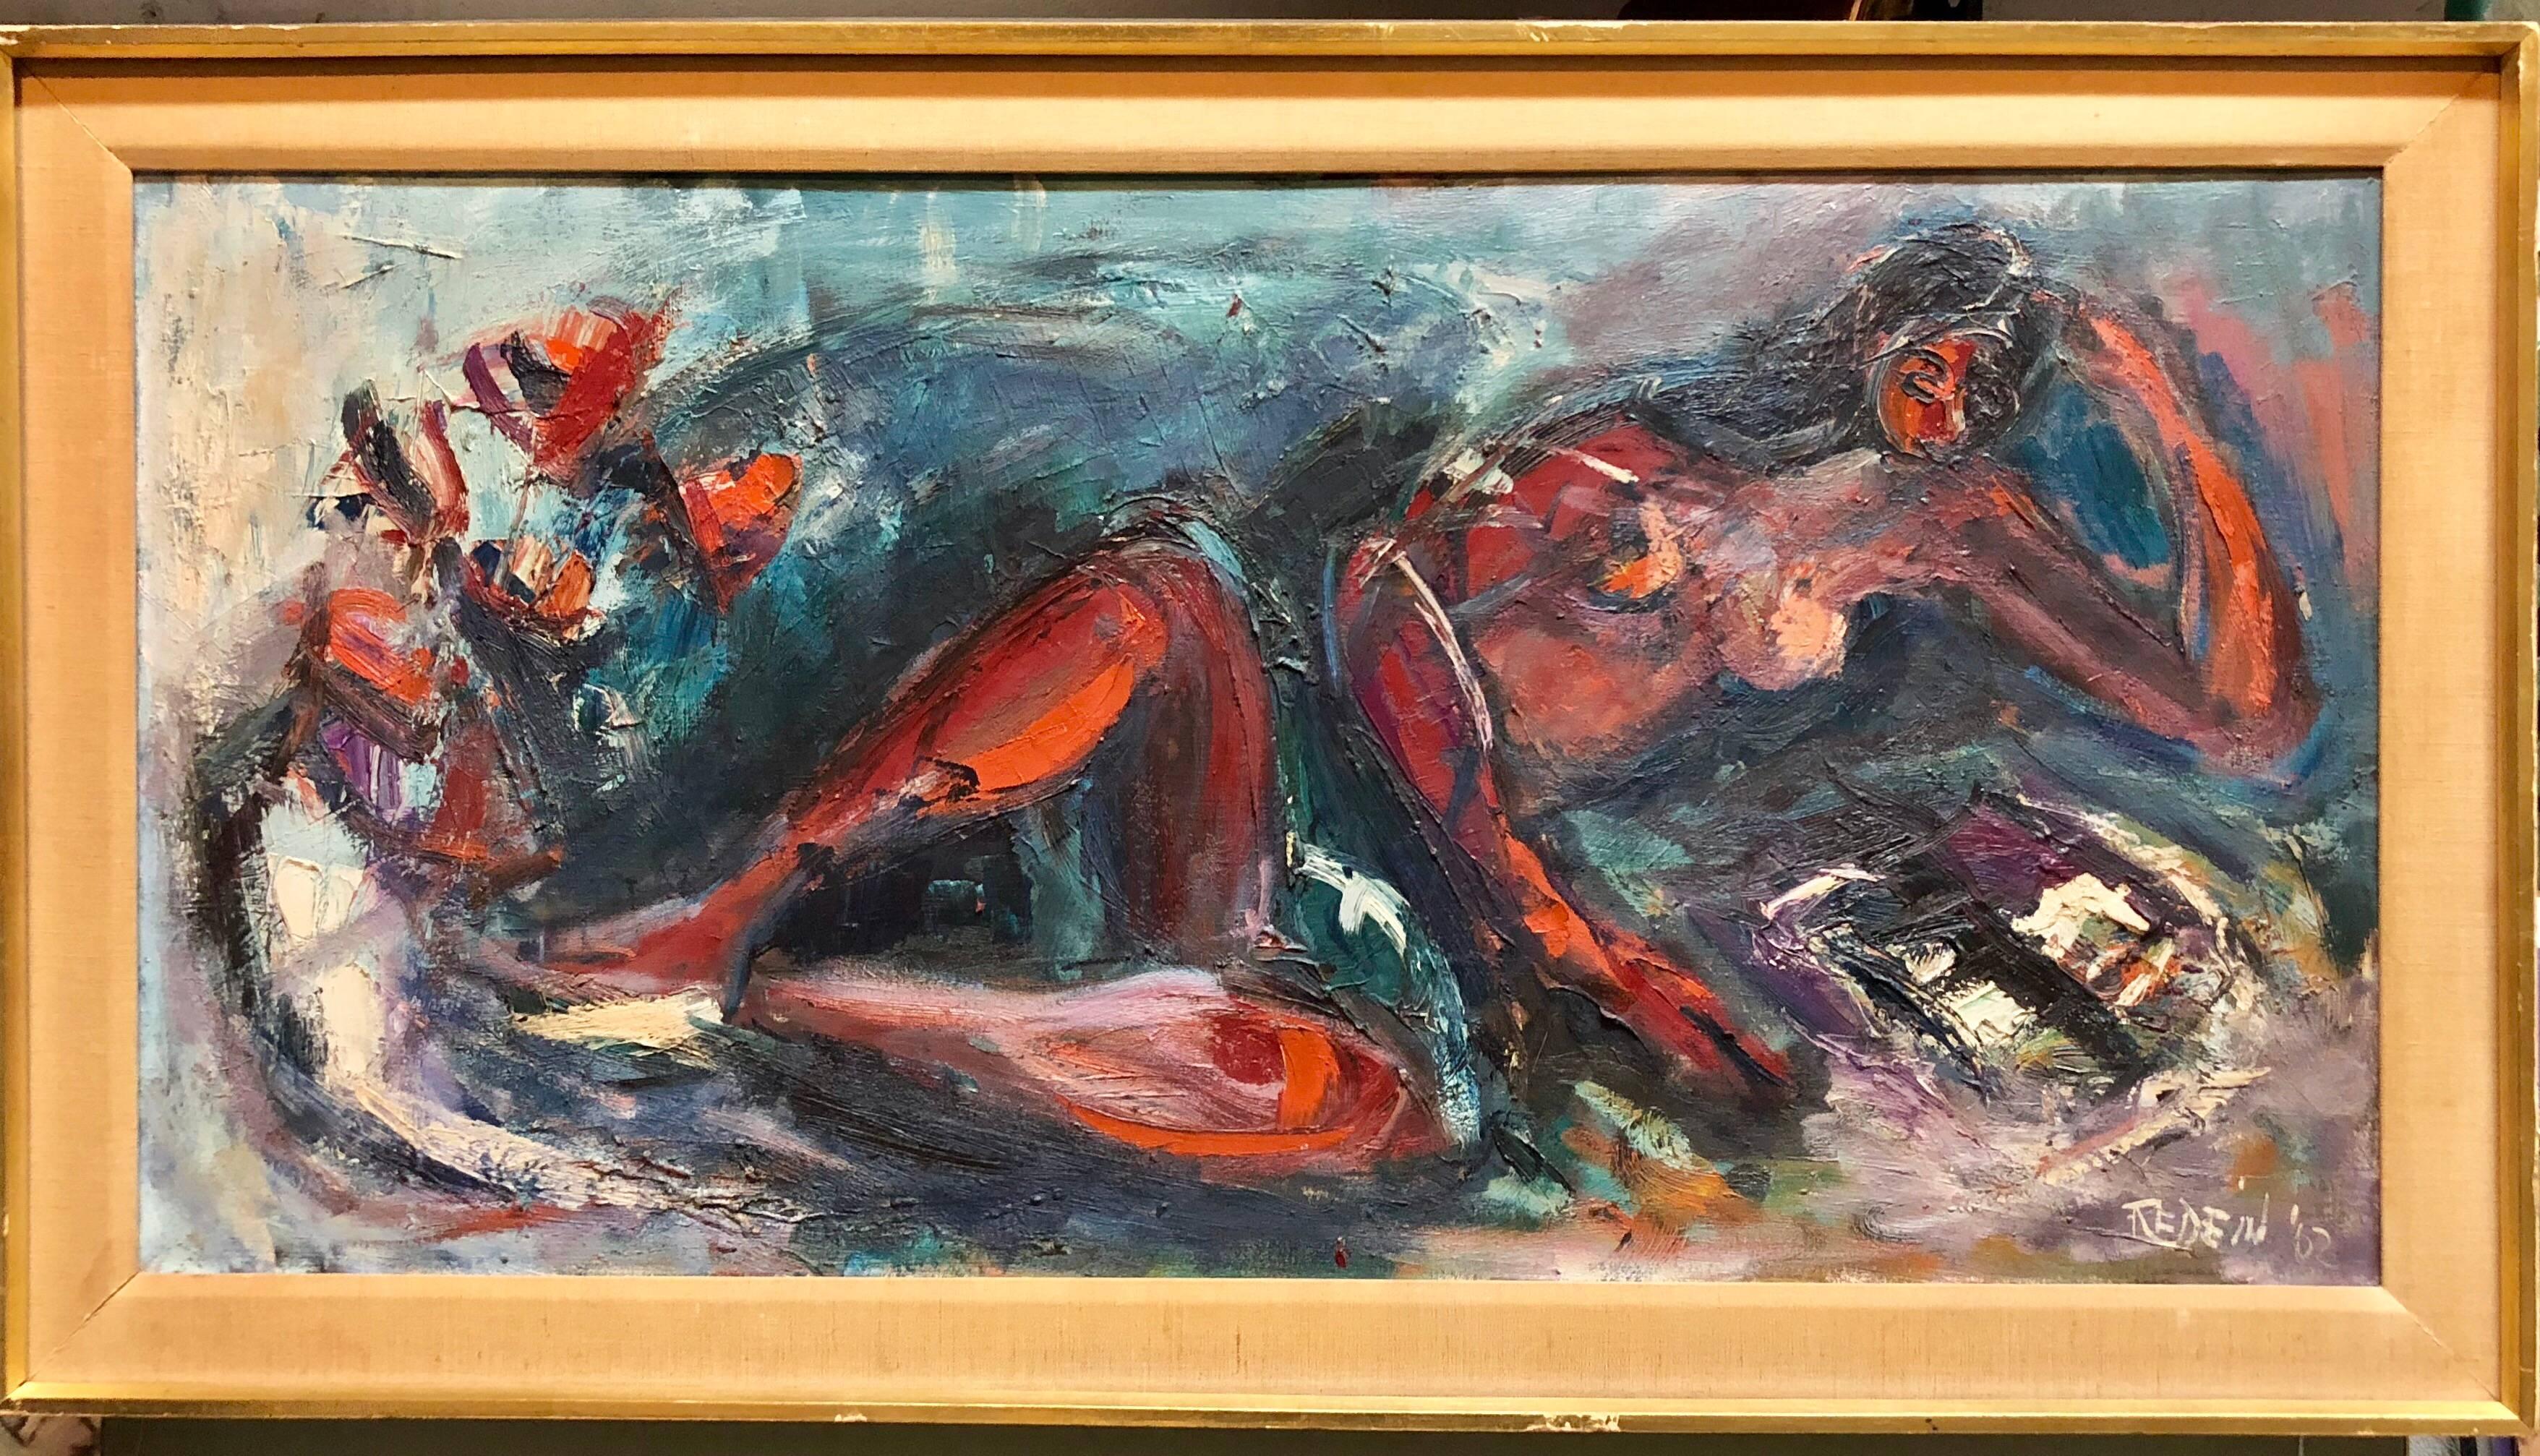 This is a large reclining nude done in an expressionist heavy impasto style. 
Alexander Redein 
Alex Redein was born on January 21, 1912 in Bridgeport, Connecticut.  He was a prominent member of the New York art community for many years.  He studied